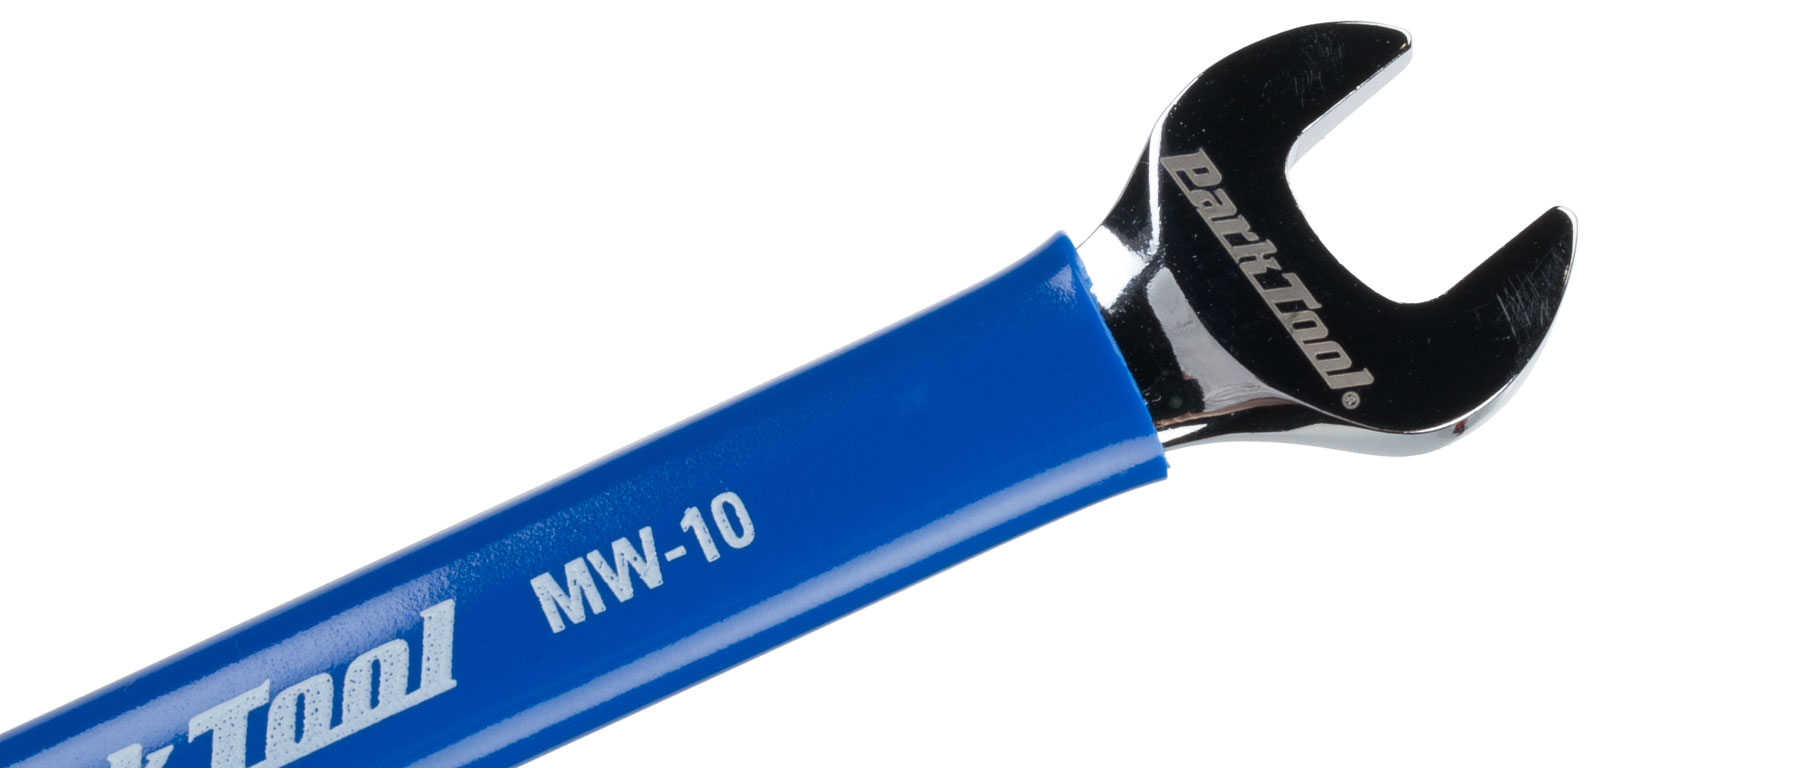 Park Tool MW Metric Wrench